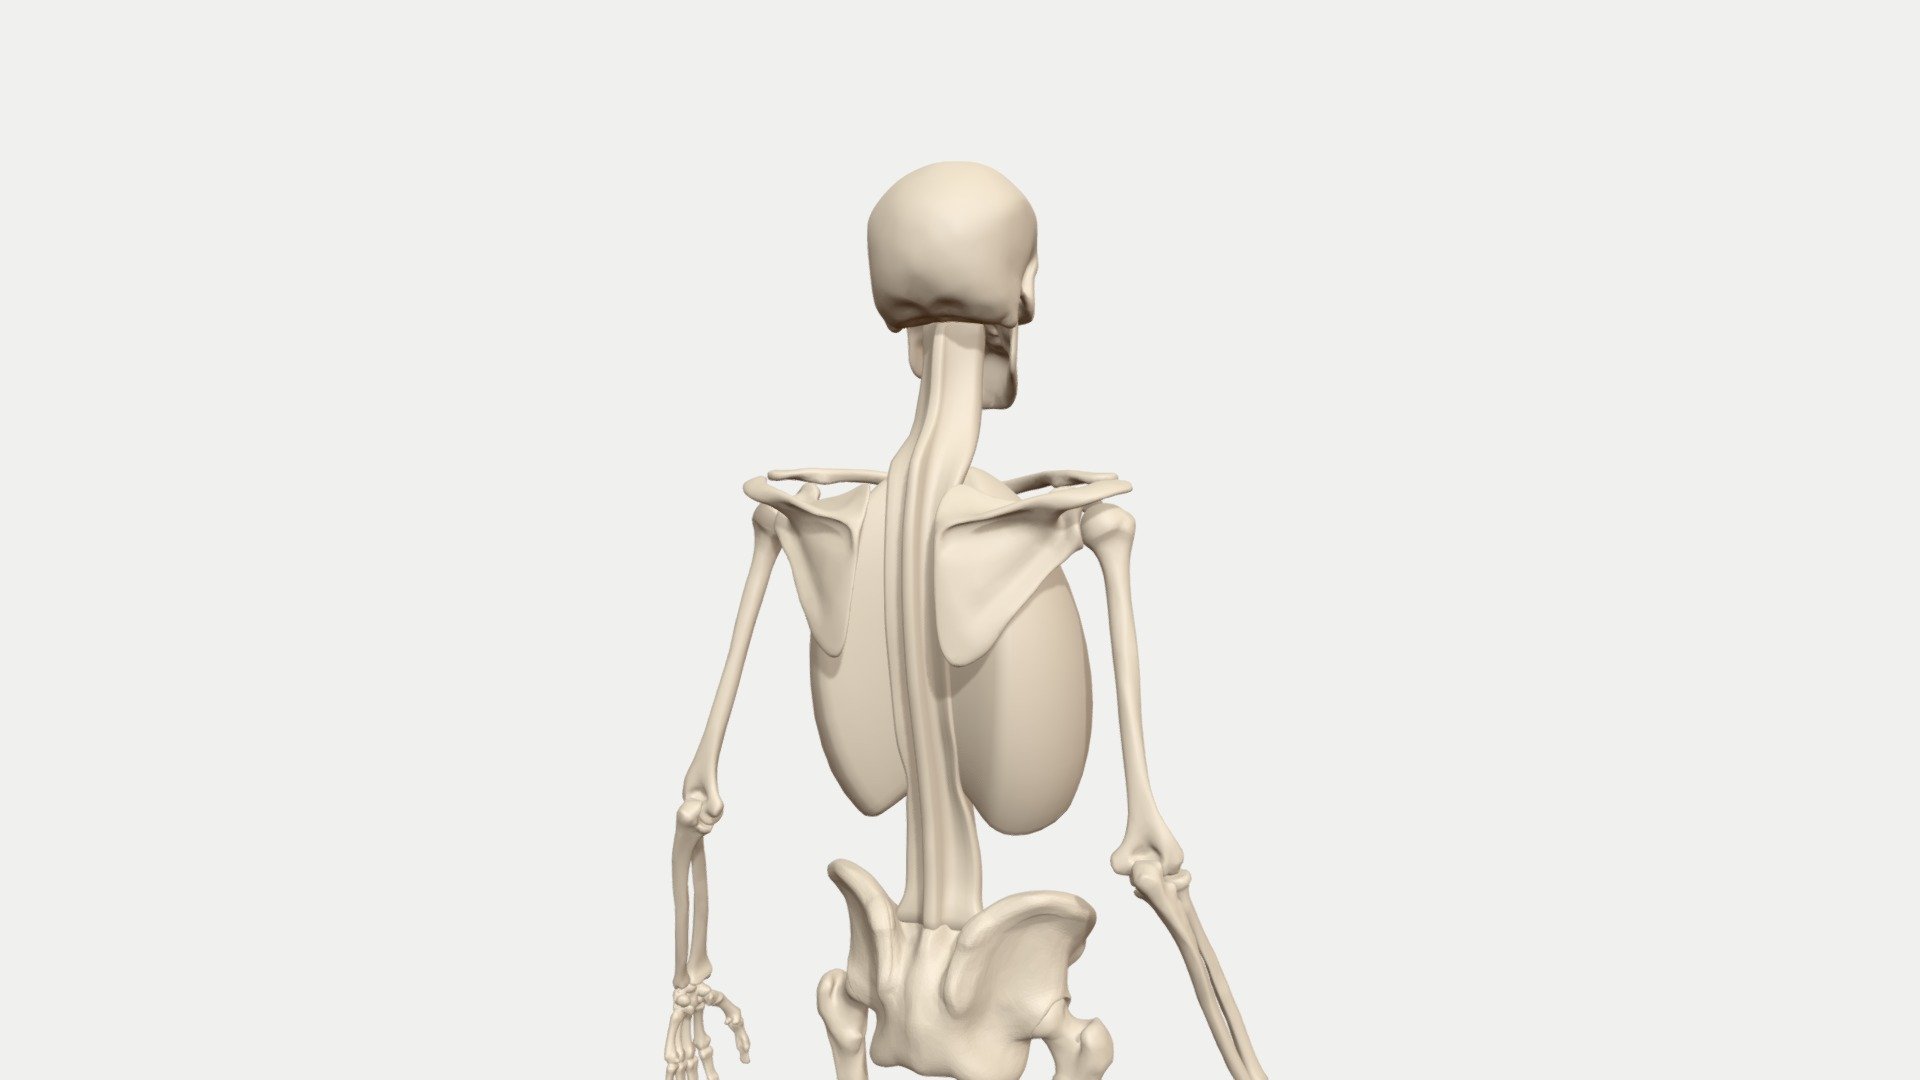 I did this animation as part of my series of blog posts on the movments of the shoulder.

You can read them here:
http://pearsetoomey.com/category/anatomy/ - Shoulder pro/retraction animated skeleton - 3D model by pearsetoomey 3d model